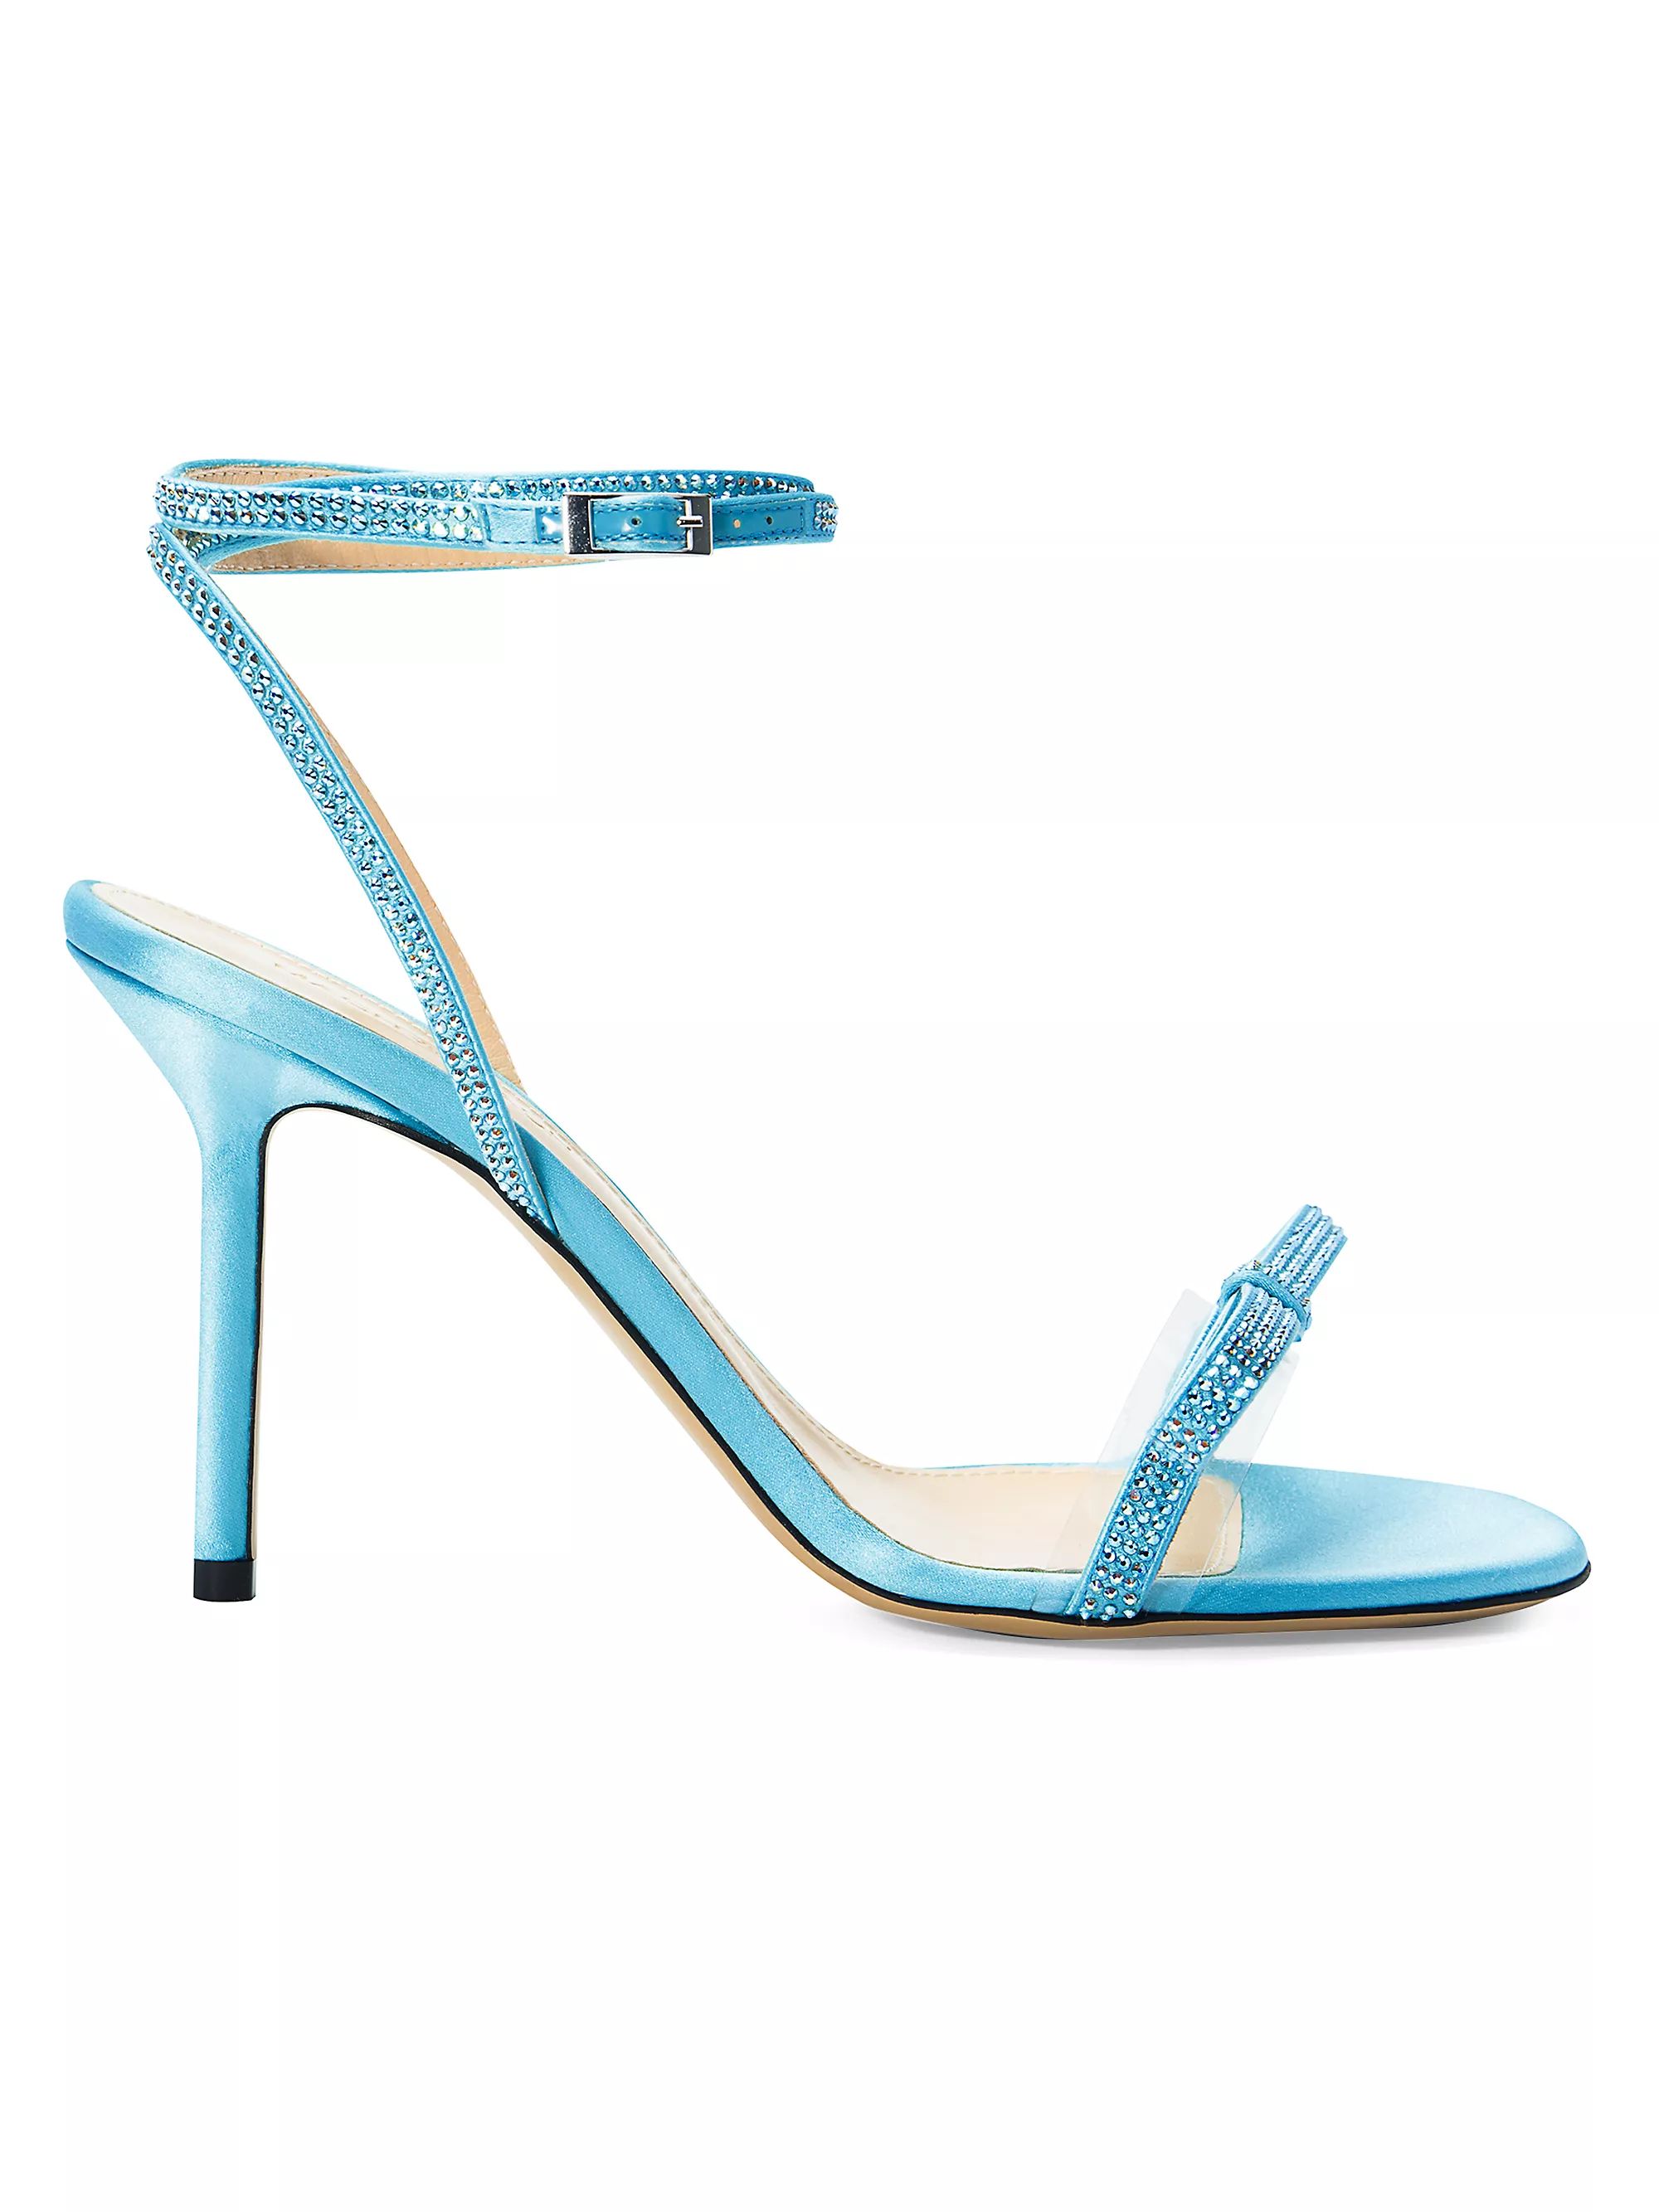 French Bow Satin Sandals | Saks Fifth Avenue